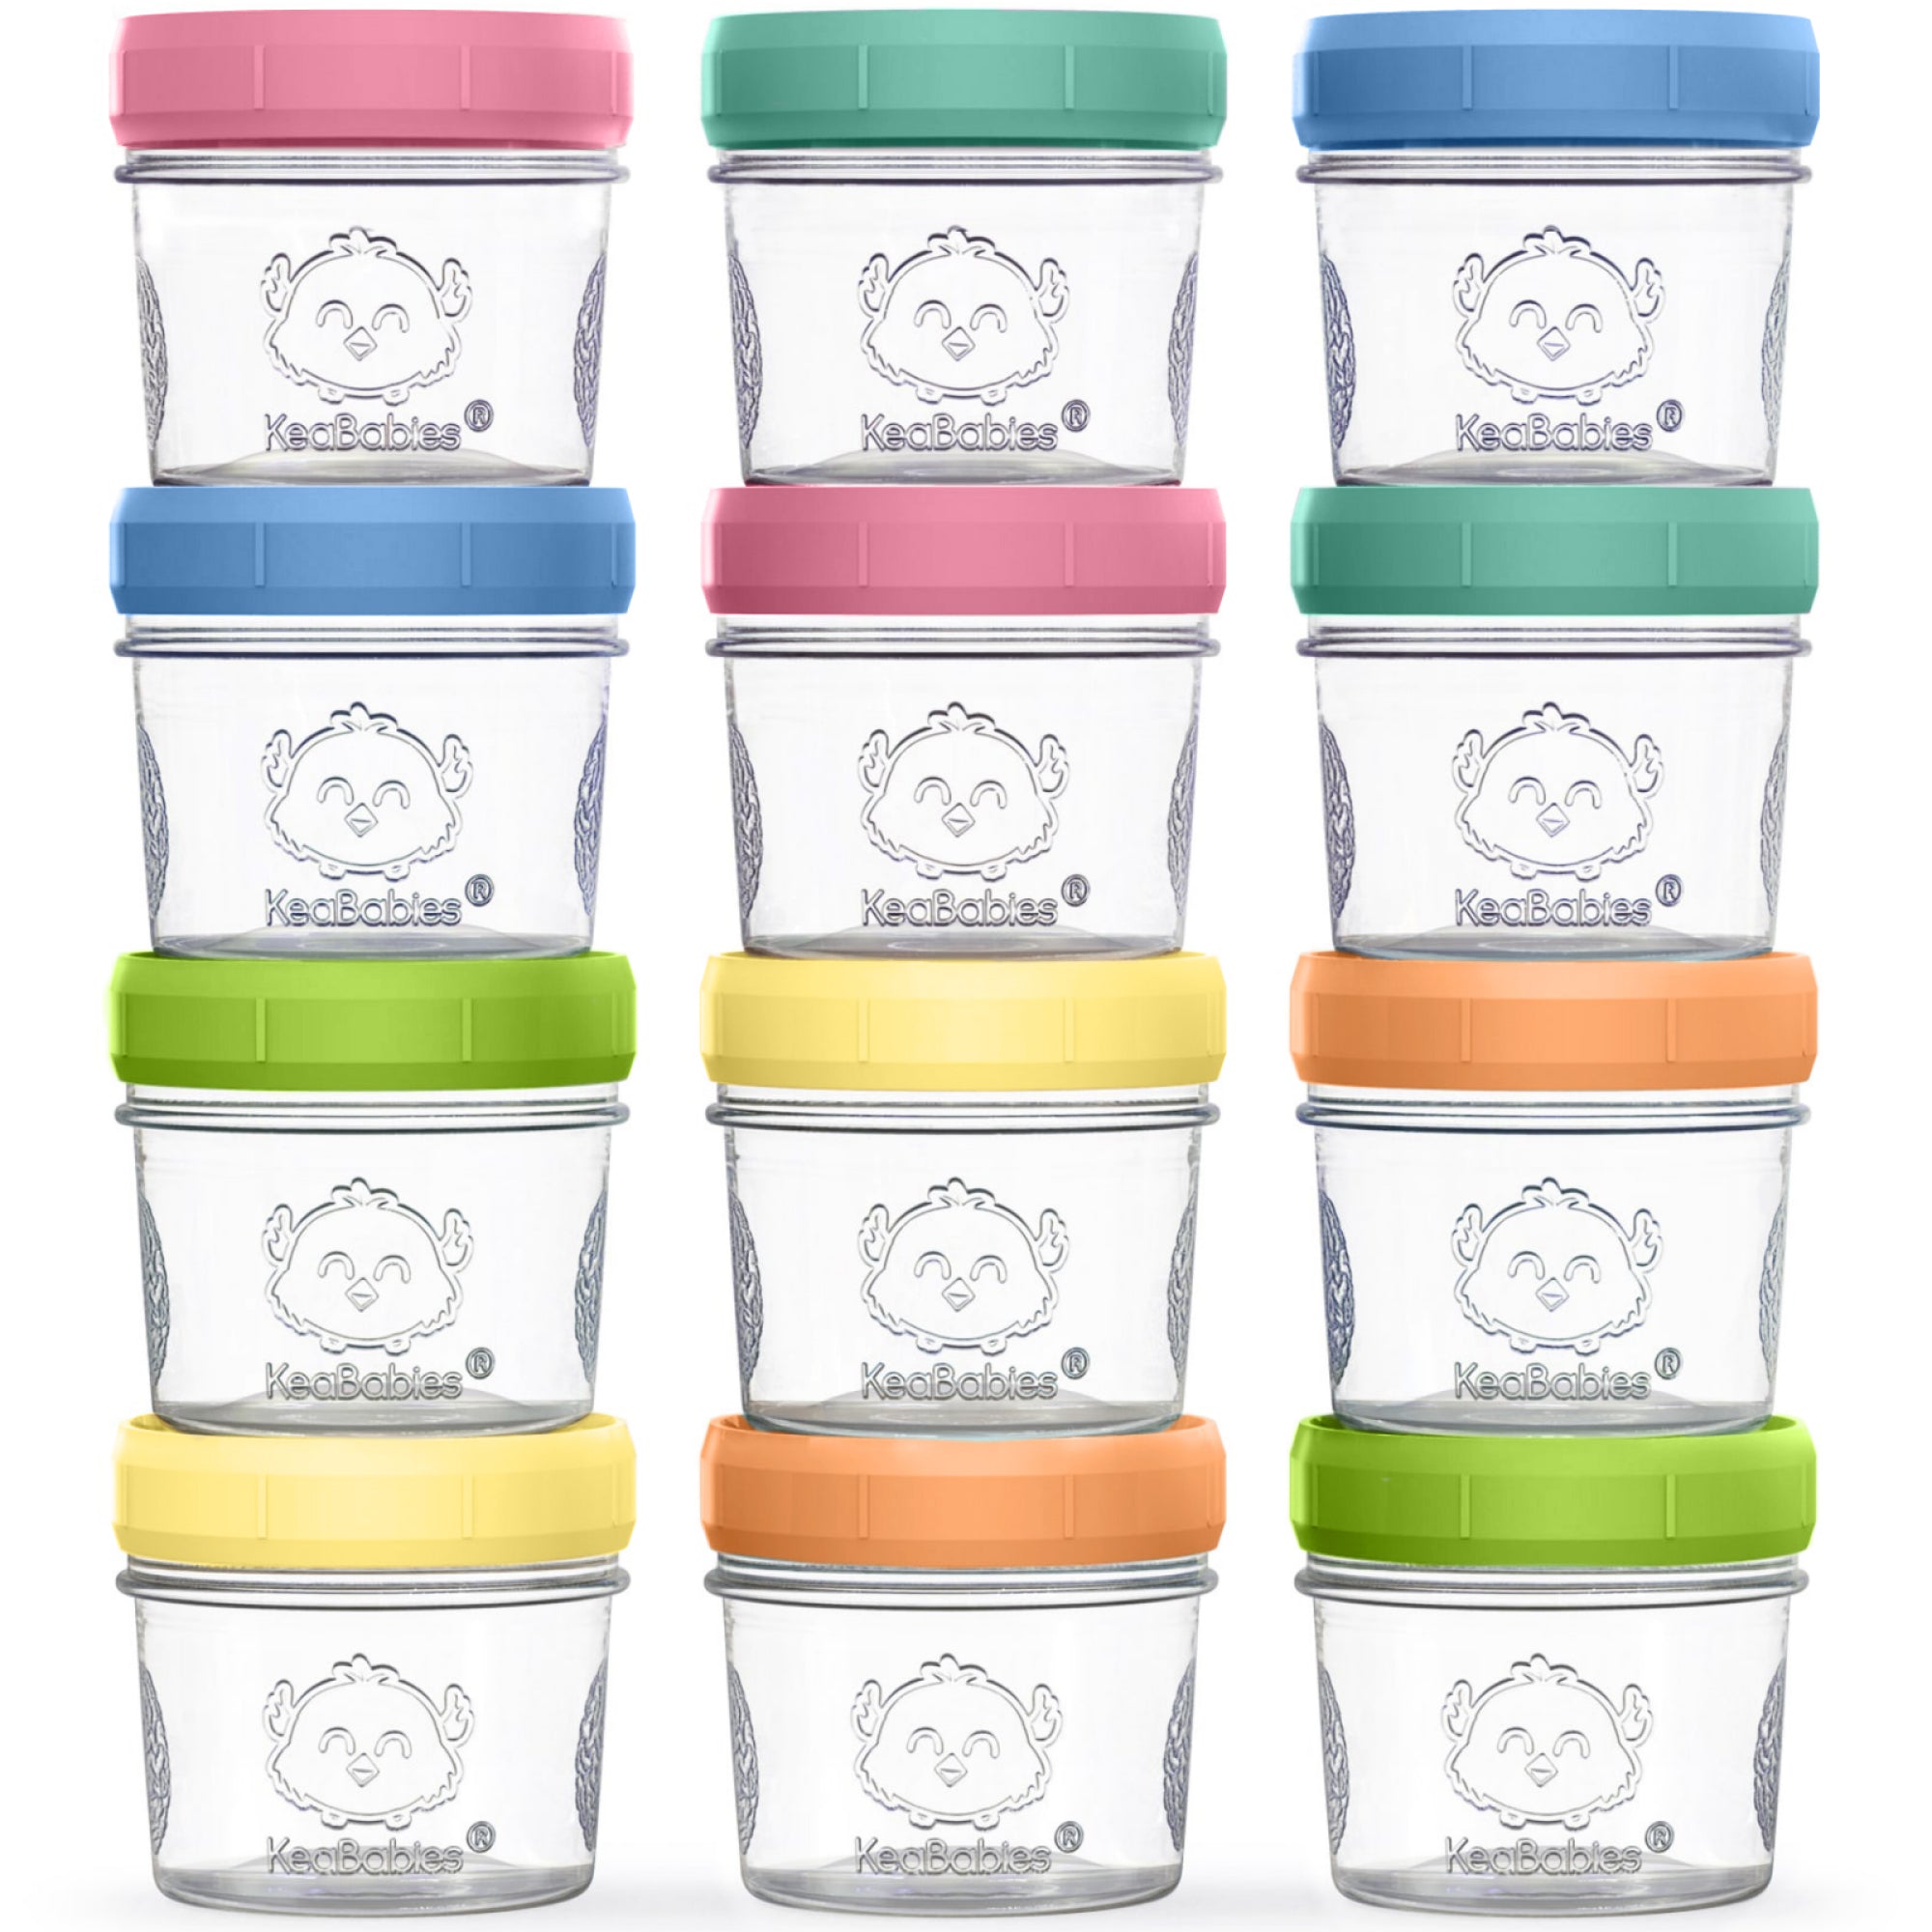 4oz Glass Baby Food Storage Jars | Food Grade Silicone Lids | Set of 12 |  Neutral Colors